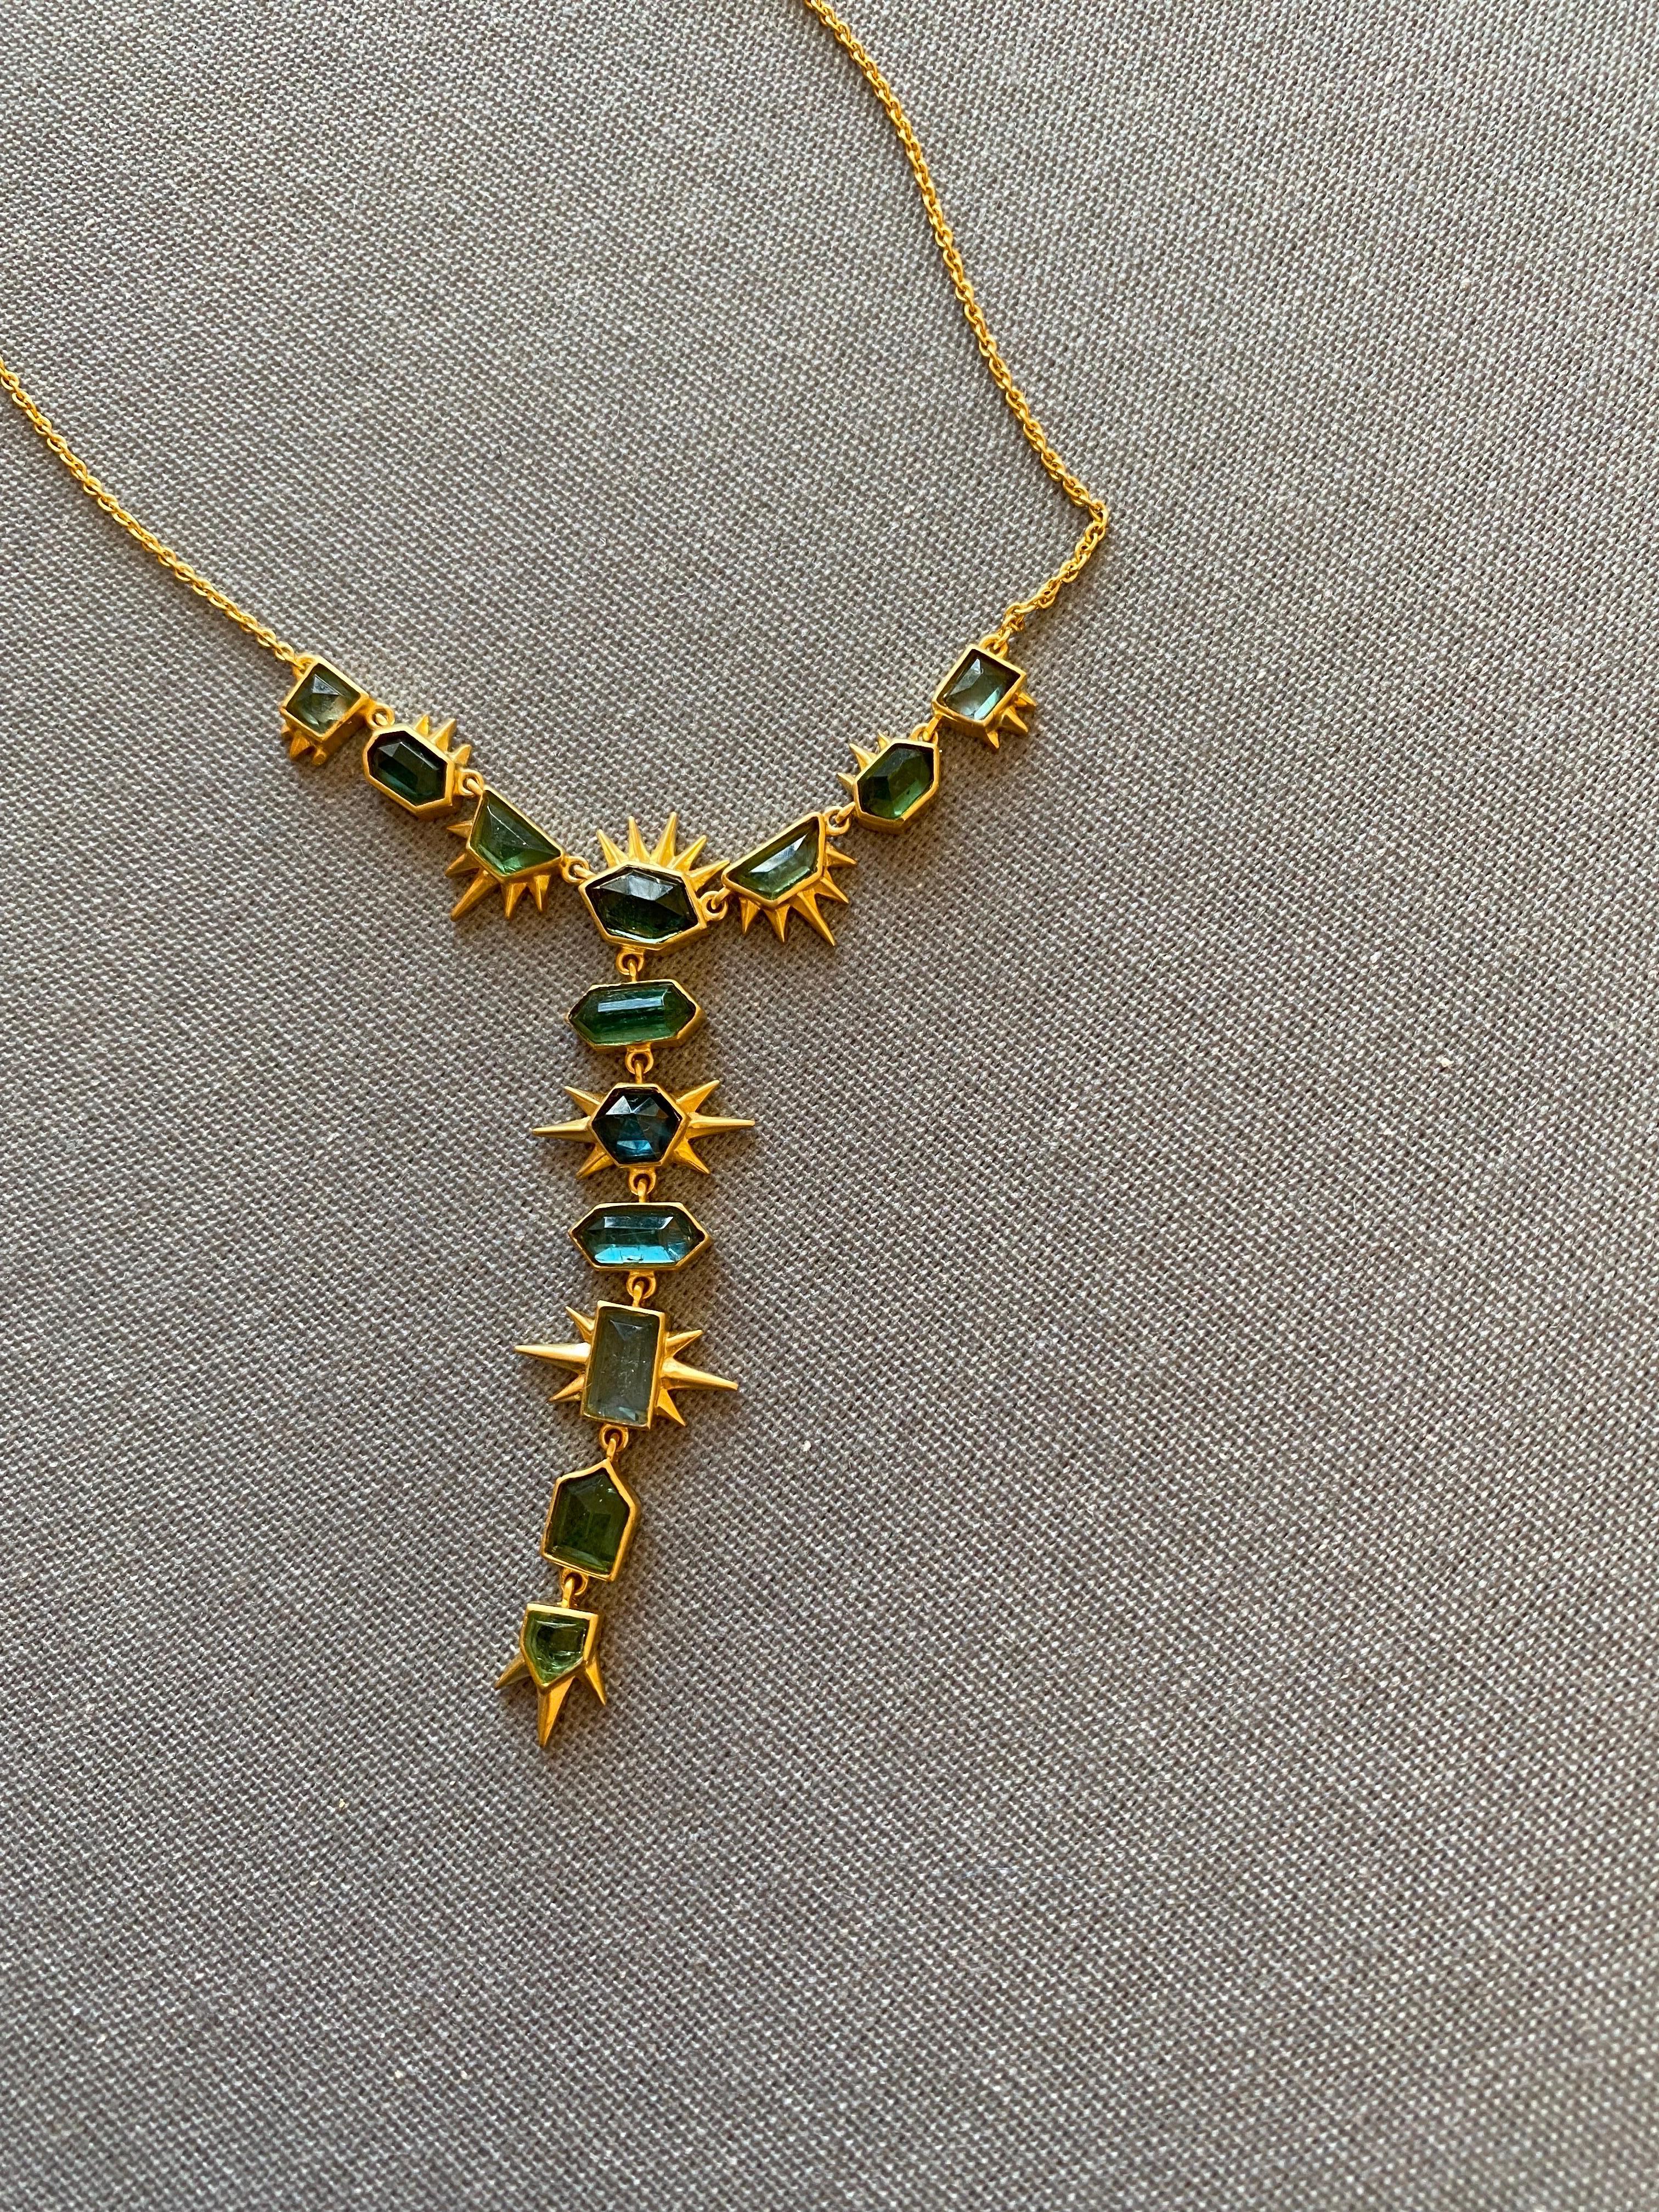 6.91 Carats Green Tourmaline and 18kt Gold Necklace by Lauren Harper For Sale 5